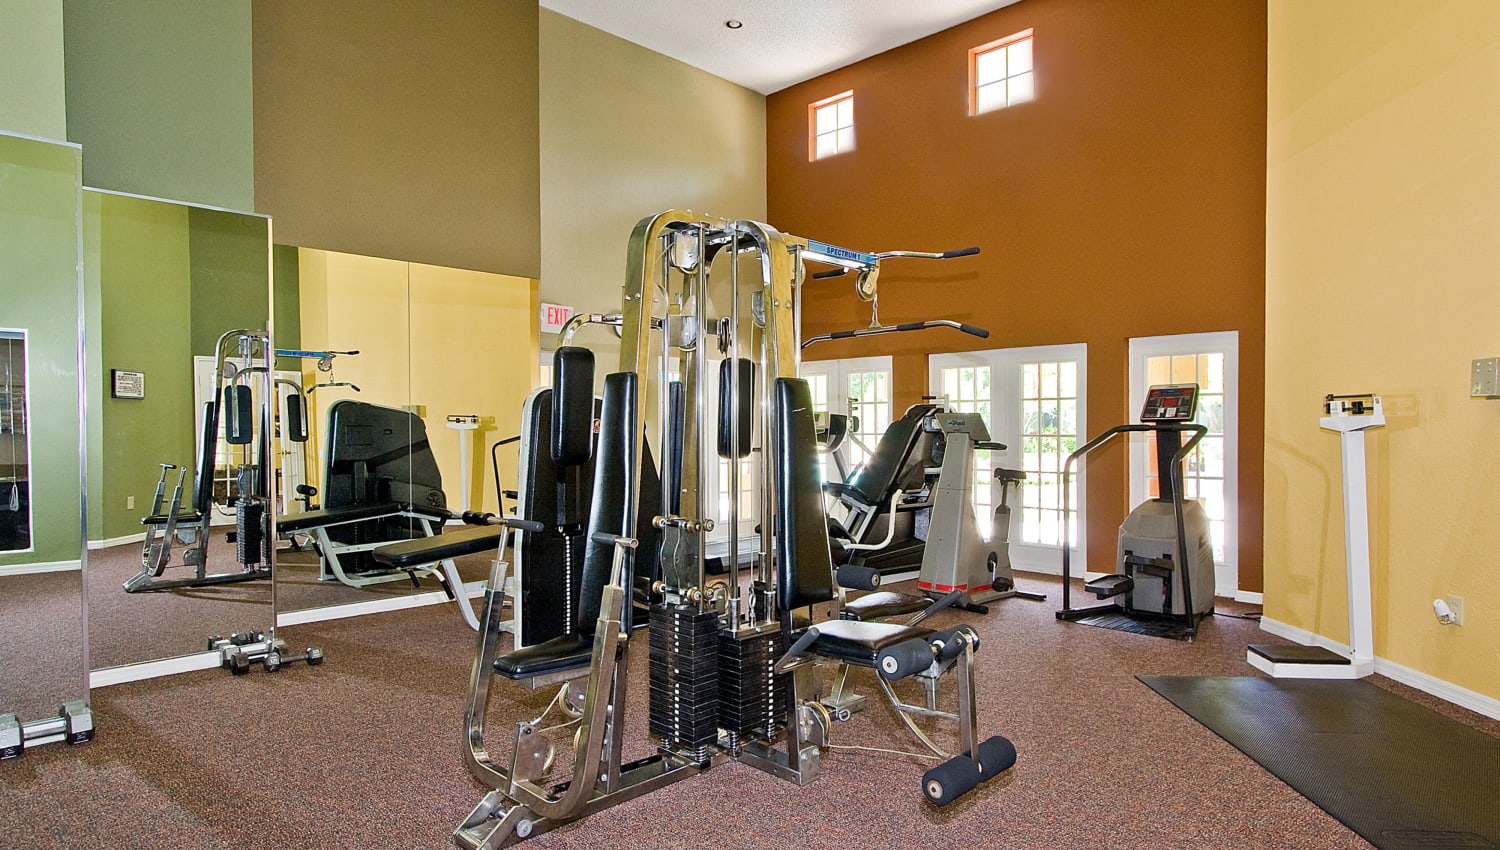 Fitness center at Mosaic Apartments in Coral Springs, Florida